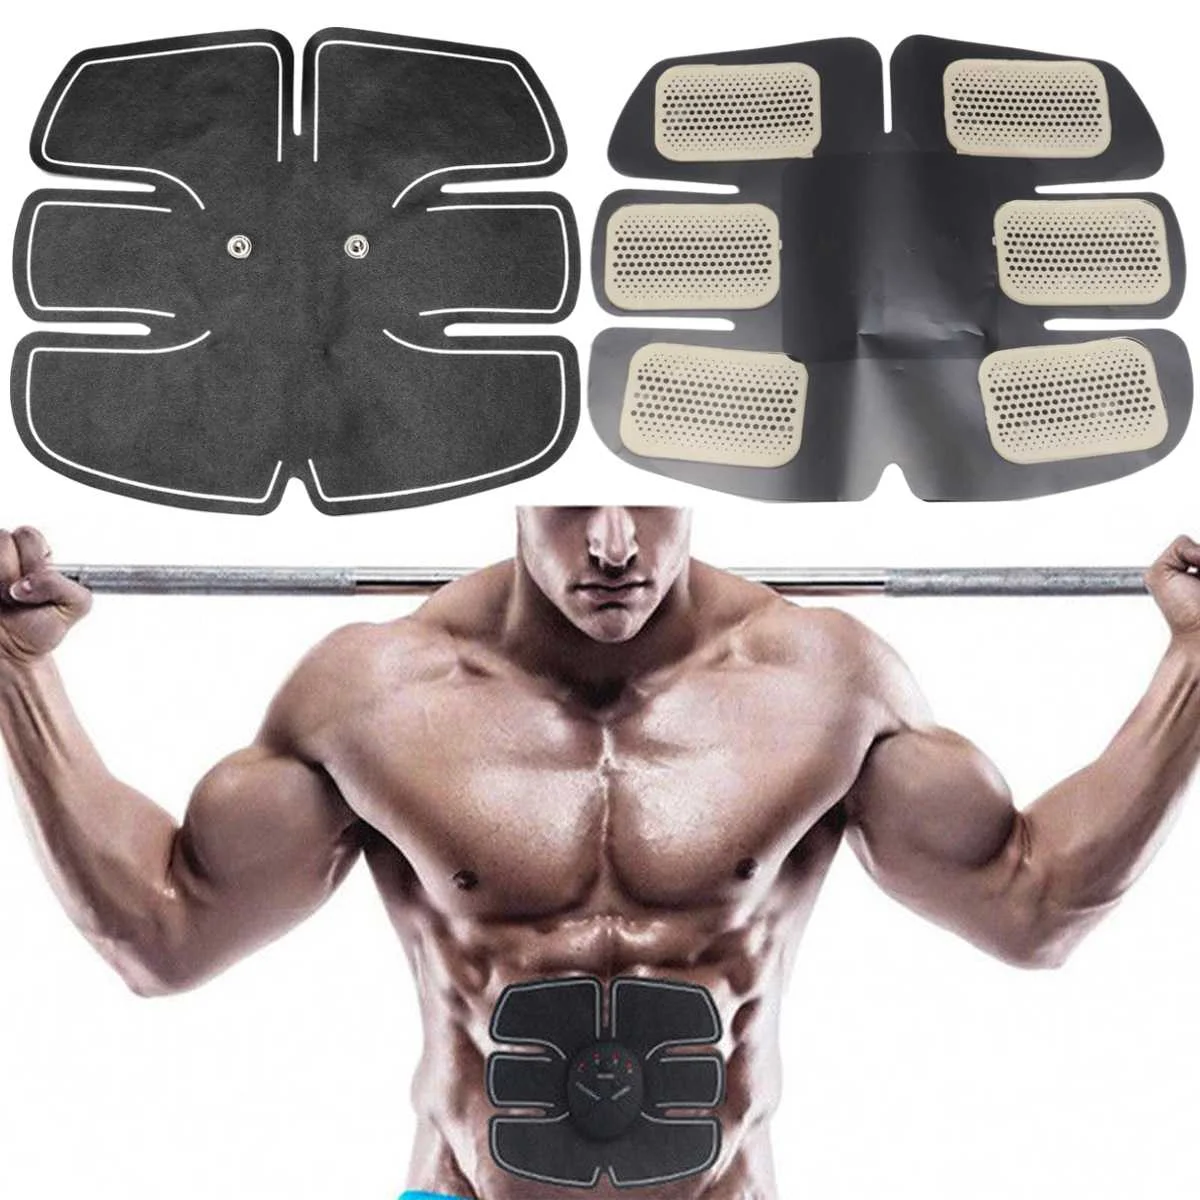 

Smart Fitness Muscle Stimulator Abdominal Pads Training Apparatus Electric Muscle Belly Exercises Abdominal Training Machine Pad